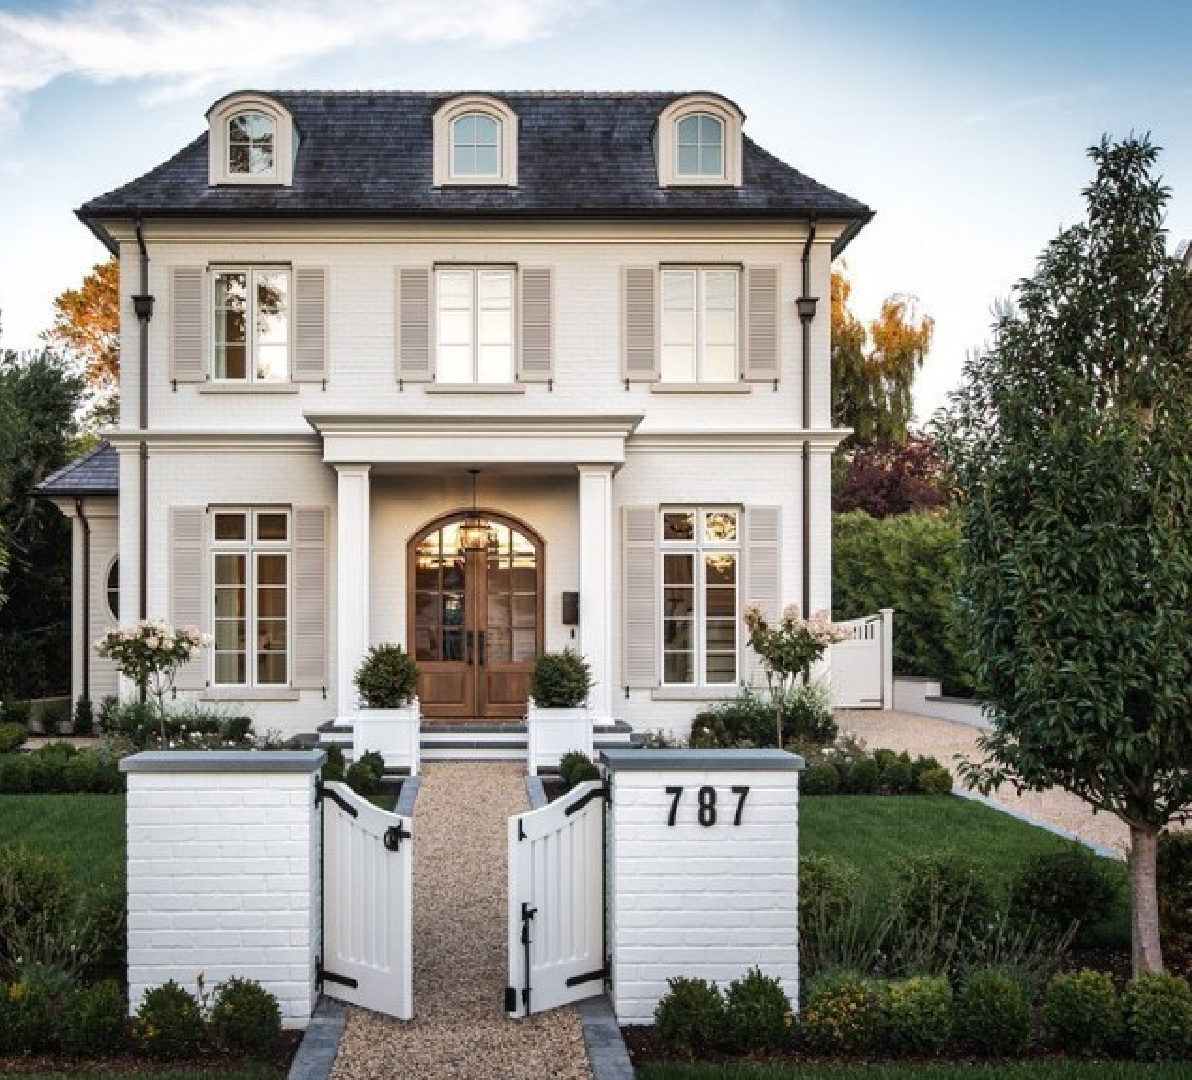 Maison de Lee - a beautiful French inspired new build with interiors designed by Jenny Martin Design. Exterior painted BM Gray Mist and shutters are Revere Pewter. #bmgraymist #bmreverepewter #modernfrench